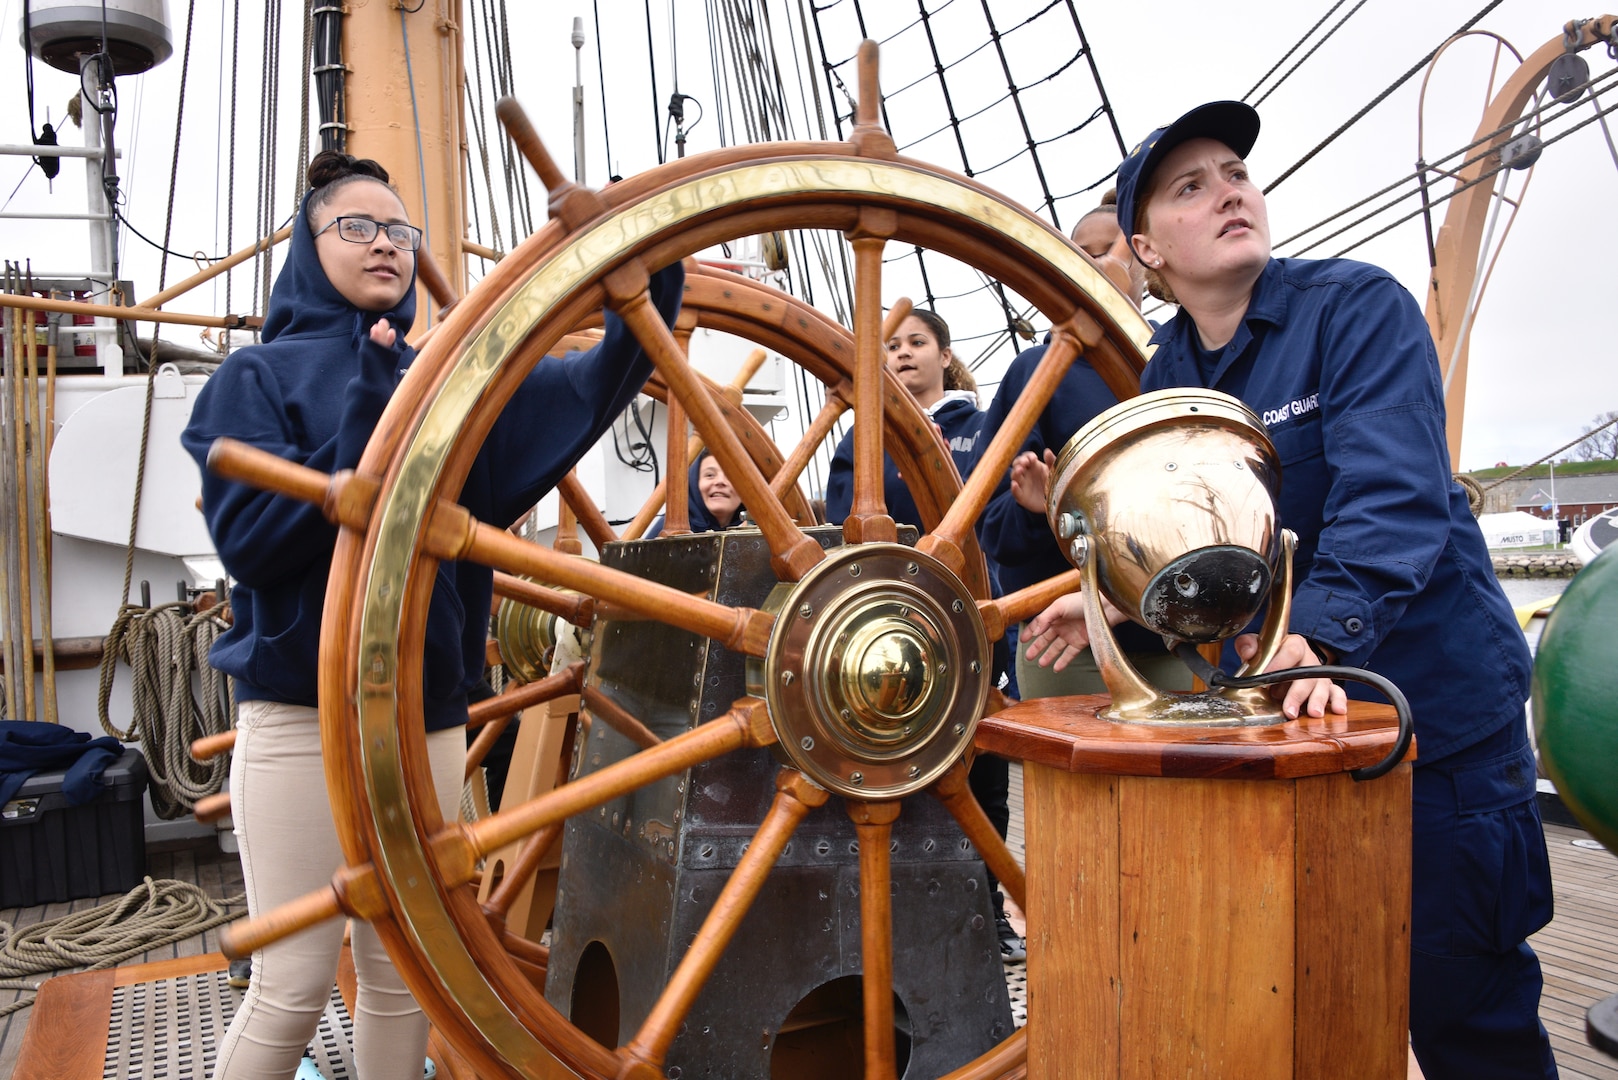 Students from the New London High School ROTC help steer the Coast Guard Cutter Barque Eagle May 10, 2018. The cutter is about underway to New London, Connecticut with members of the Coast Guard Foundation, Coast Guard Academy, New London Rotary Club and students in the New London High School Navy ROTC.